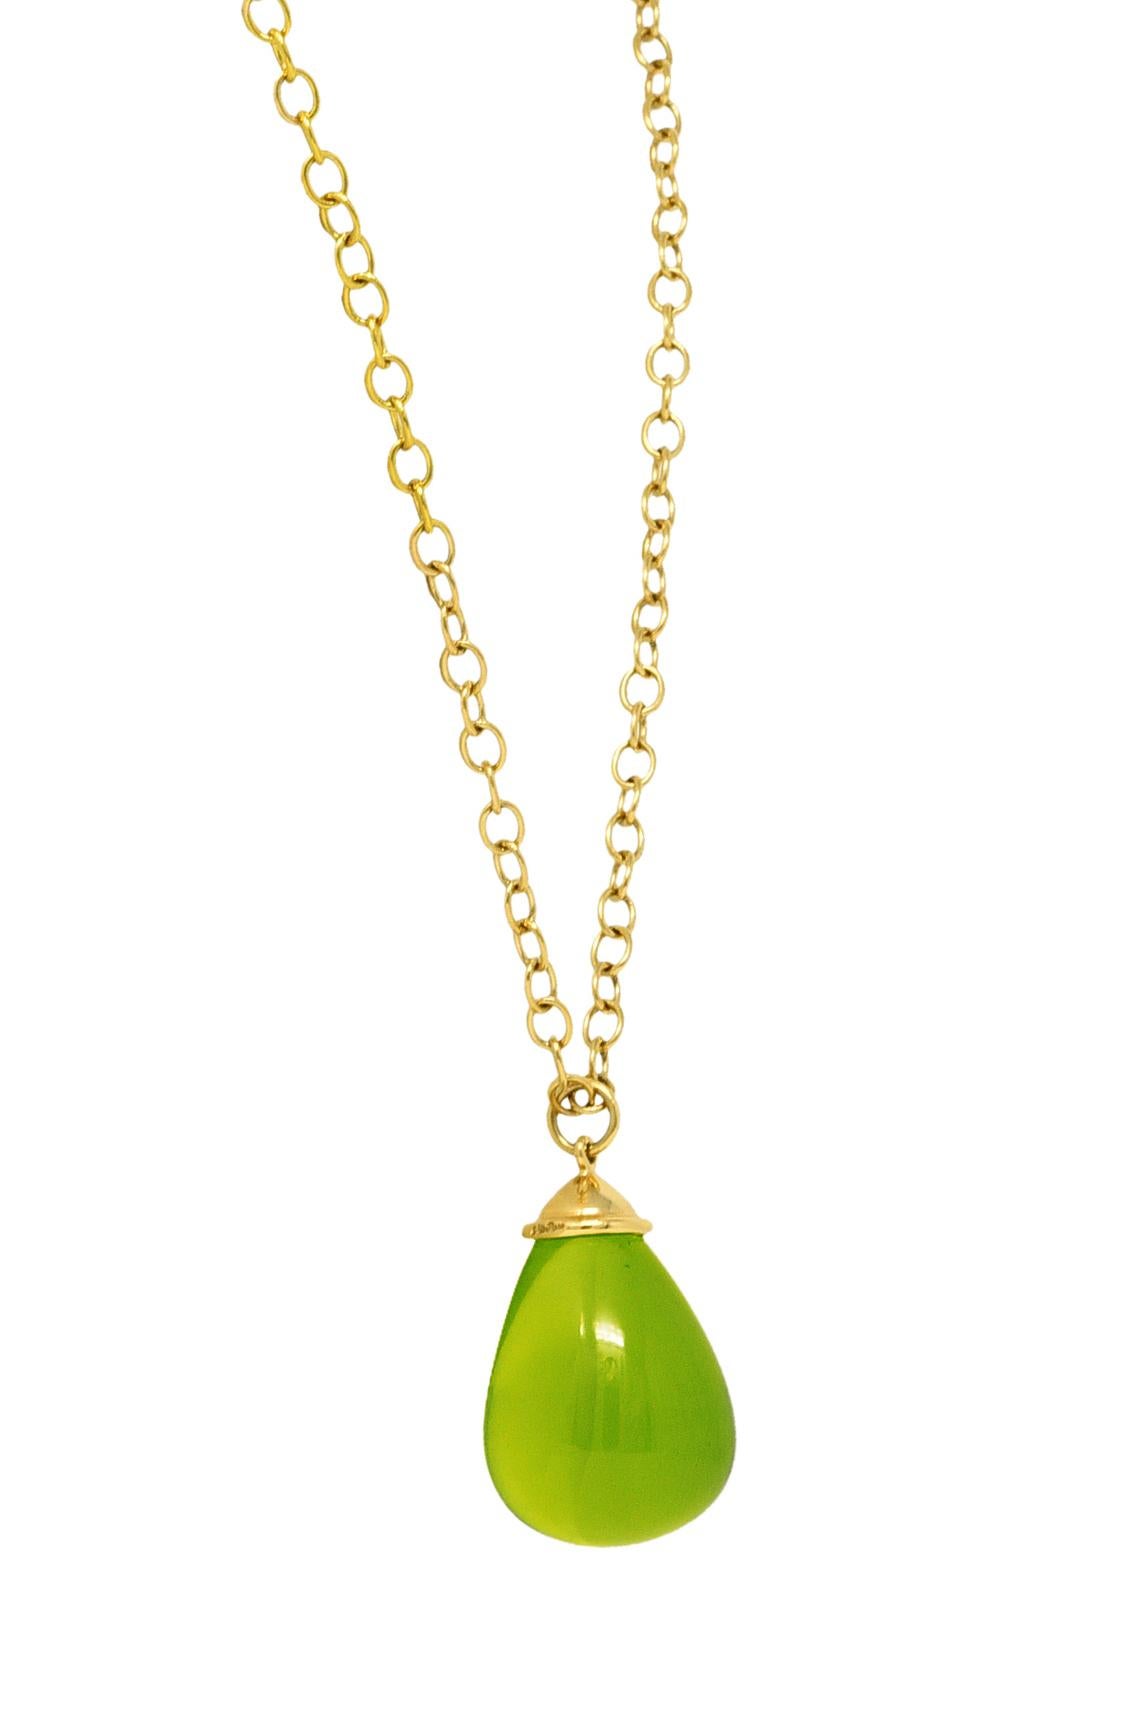 Necklace is designed as cable chain suspending a substantial teardrop shaped crystal quartz. Transparent yellowish-green in color with medium saturation - measuring 23.0 x 30.0 mm. Suspended from a fluted terminal cap. Completed by lobster clasp